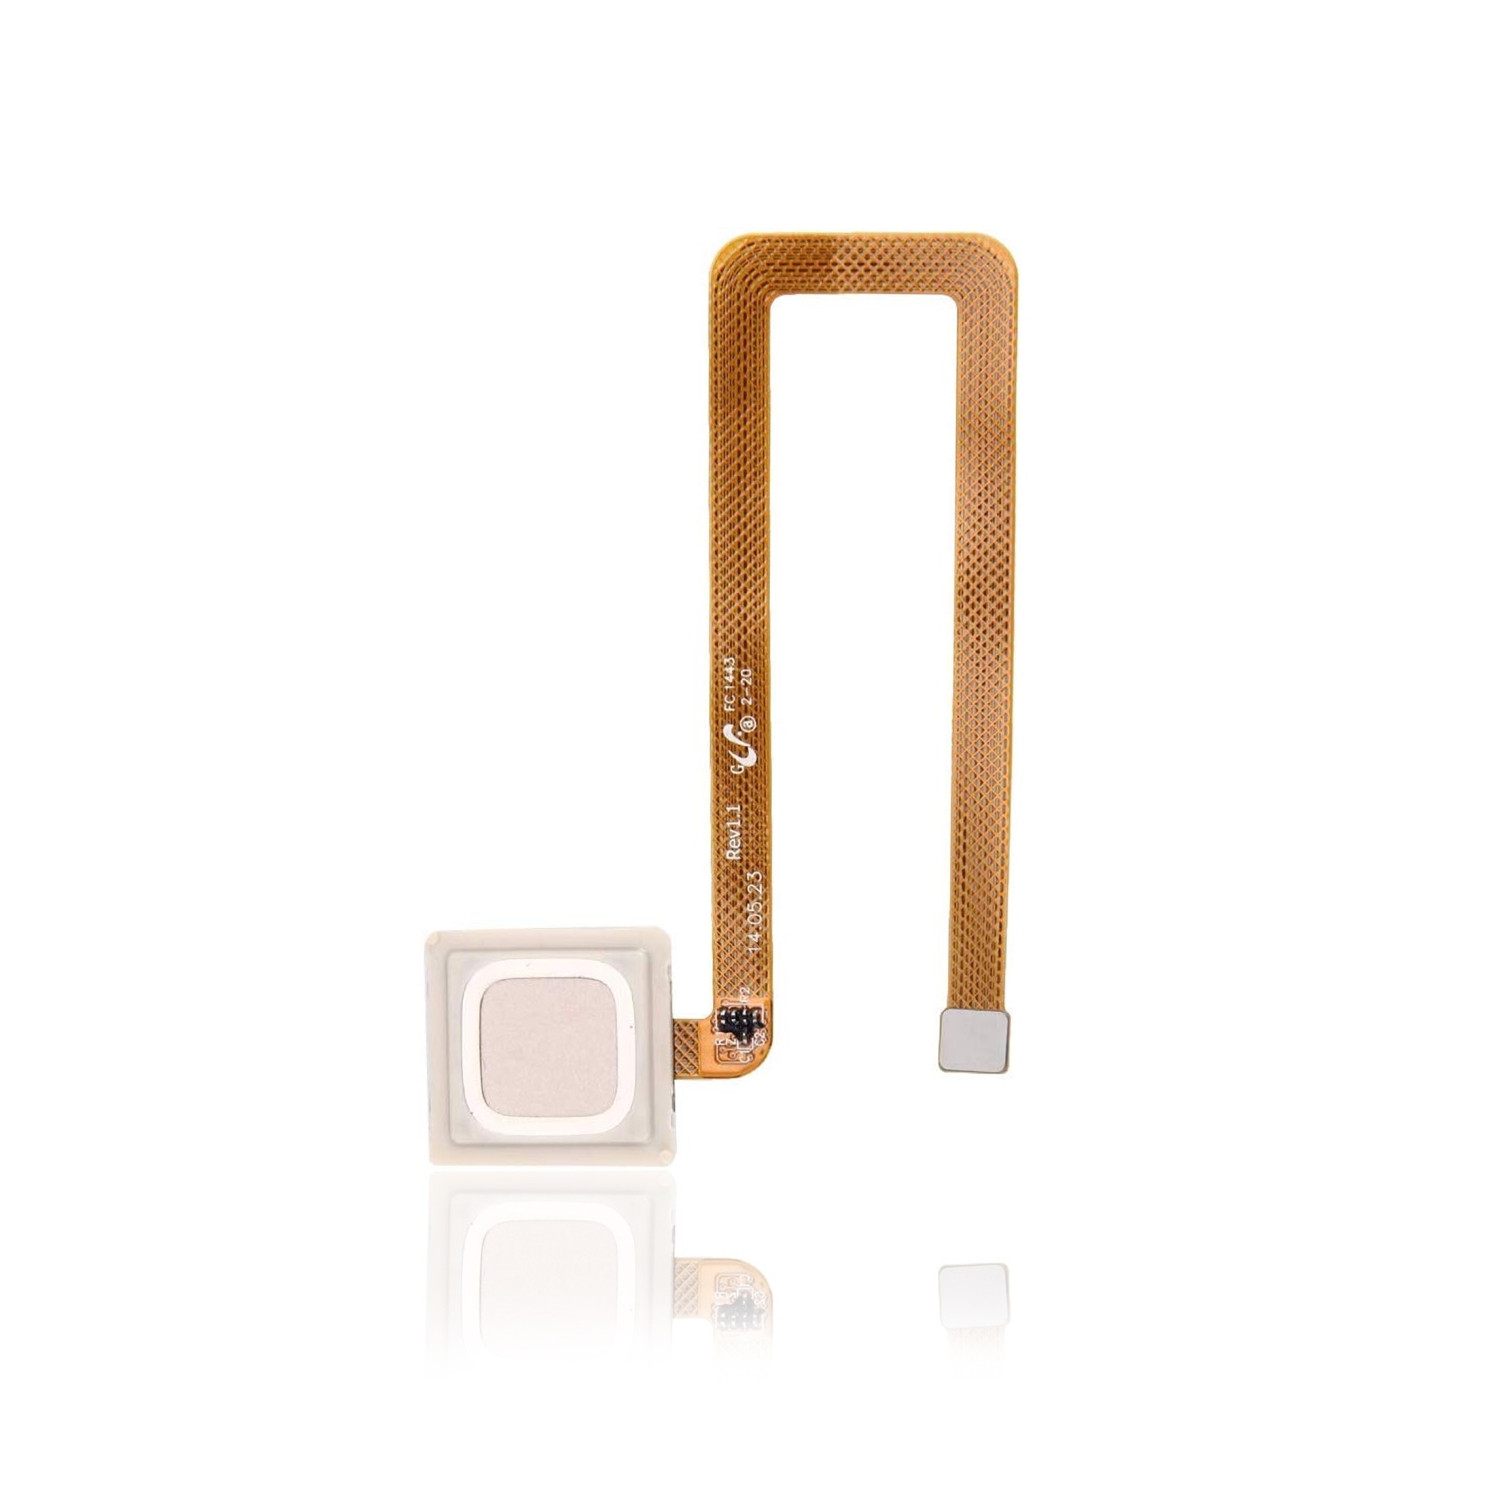 Replacement Fingerprint Reader With Flex Cable Compatible For Huawei Mate 7 (Gold)